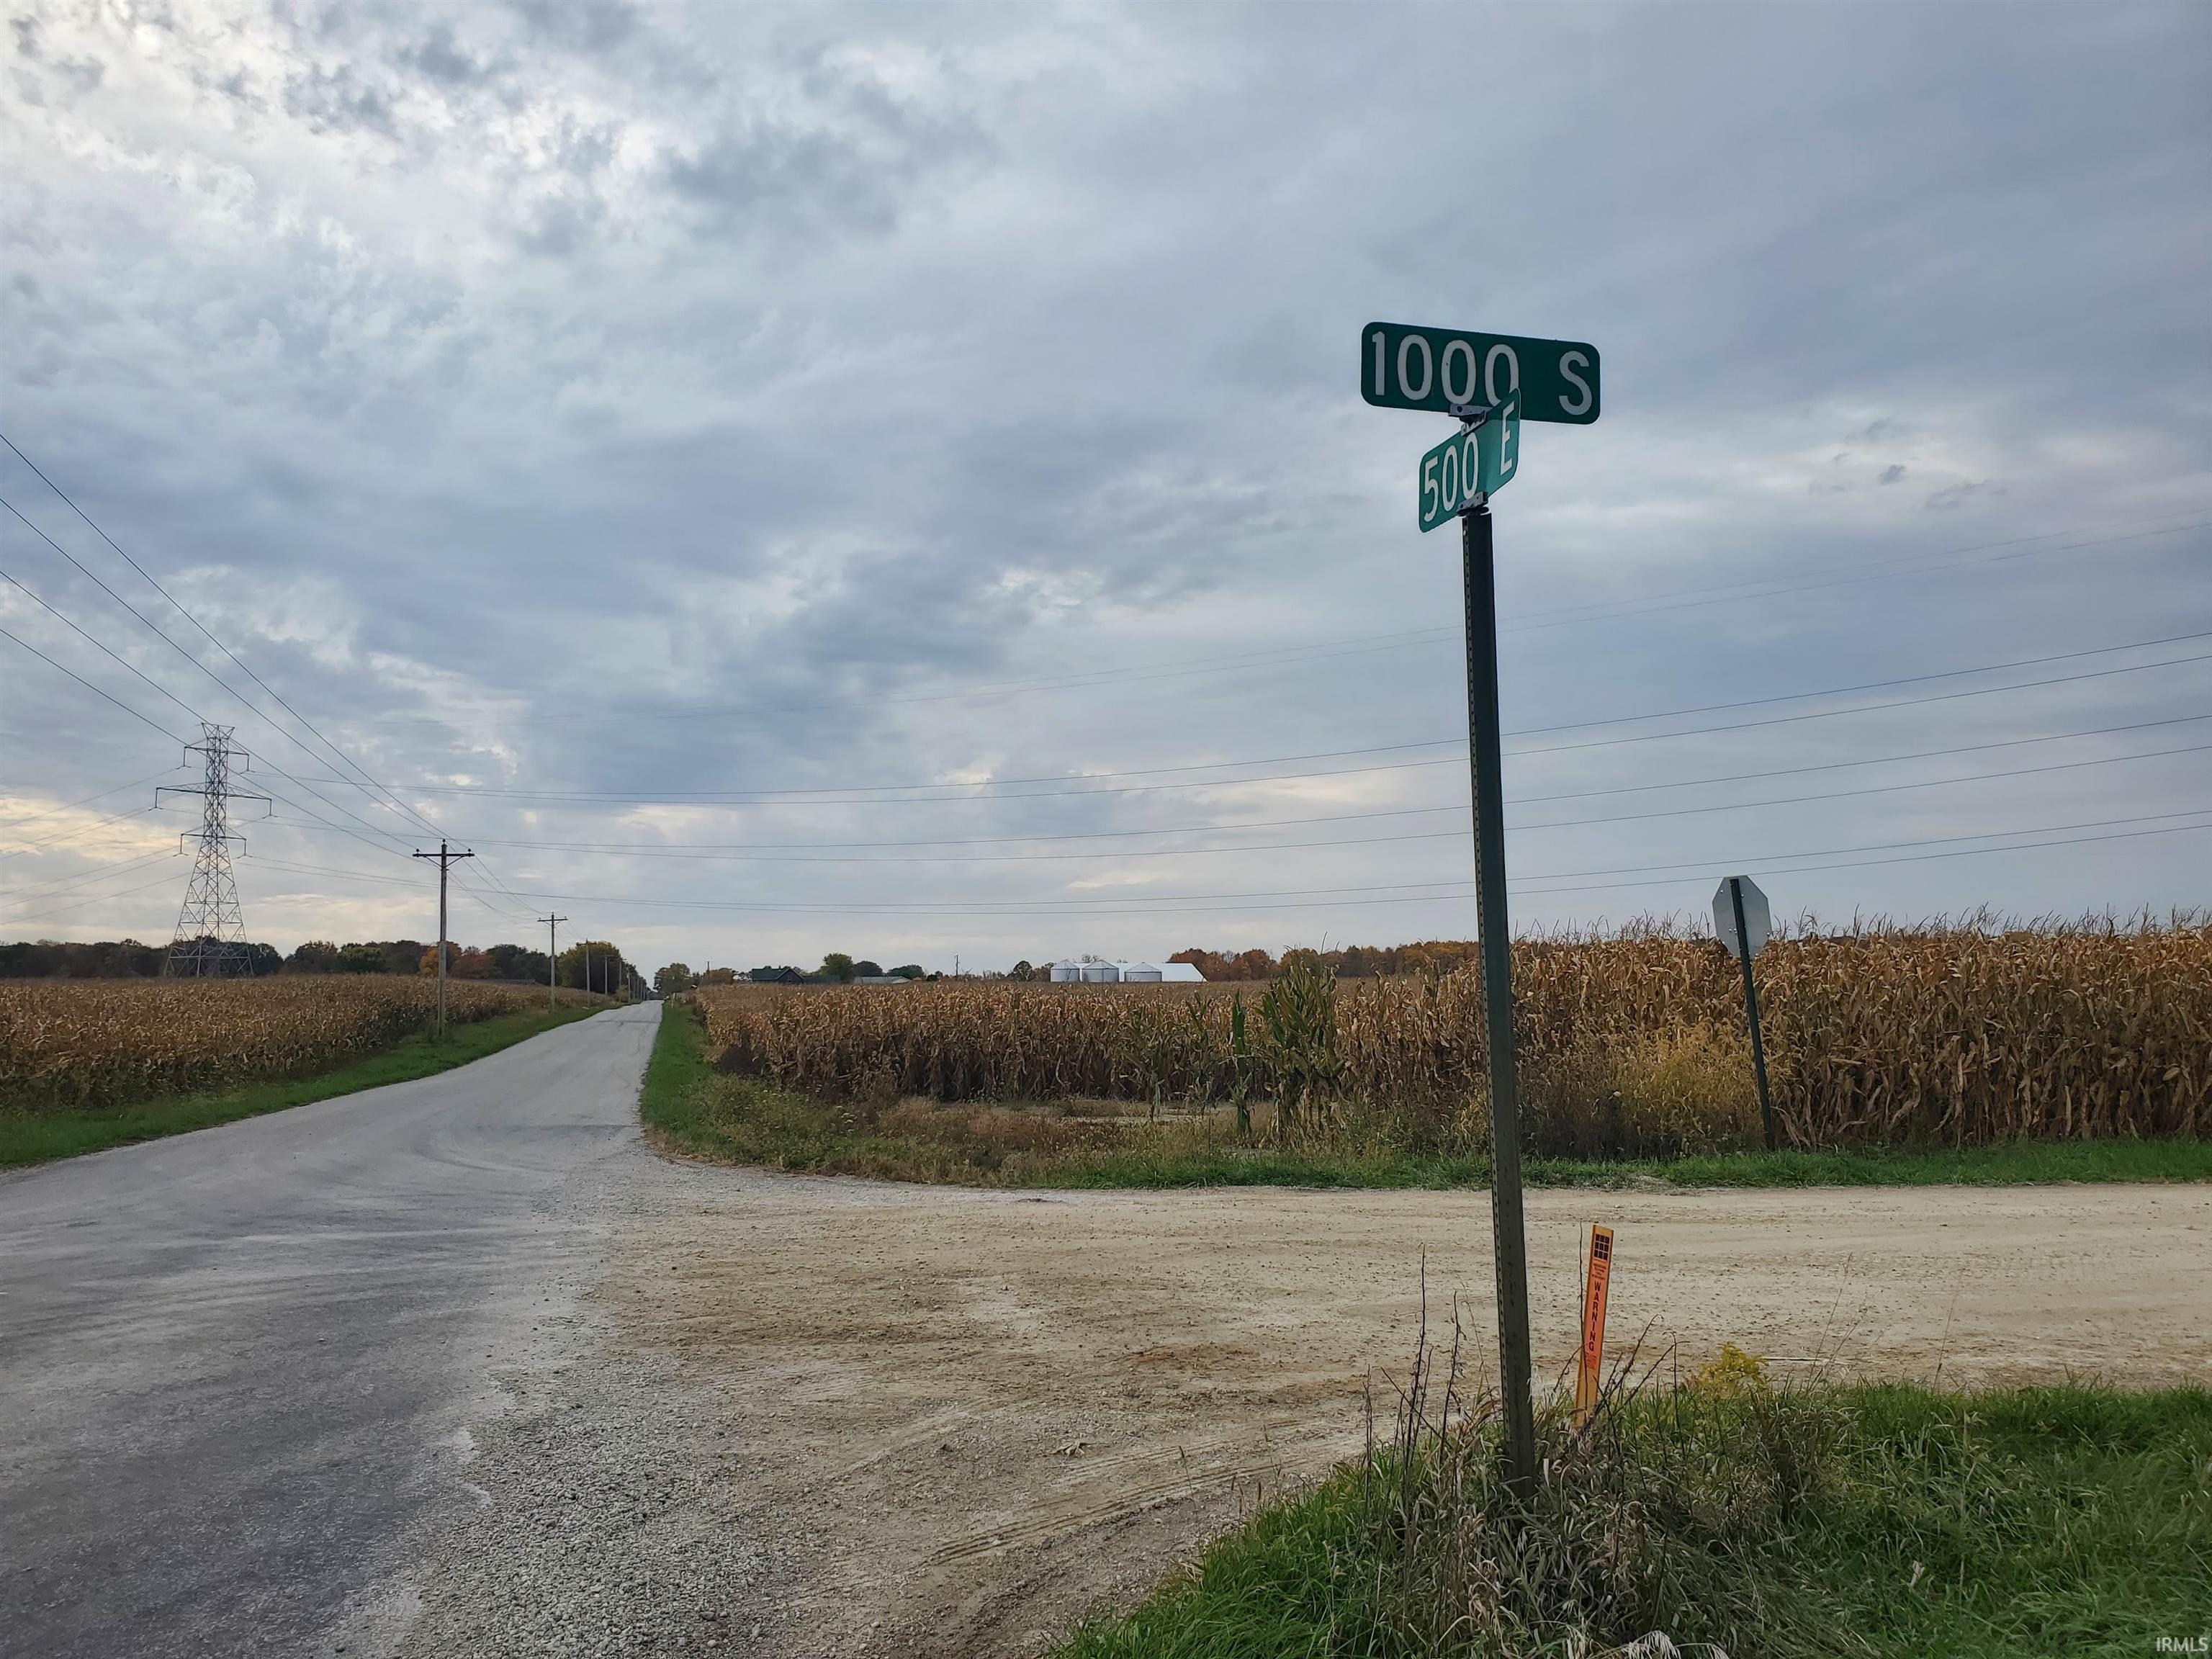 Excellent Jefferson Township farm with contiguous acreage on the southwest corner of CO RD 500 E and 1000 S in Whitley County. 116.98 acres total with mostly all tillable except the site for an 86x96 pole barn and 3 small grain bins and an old tear down farm house a long with road right of ways. To be sold as a whole.